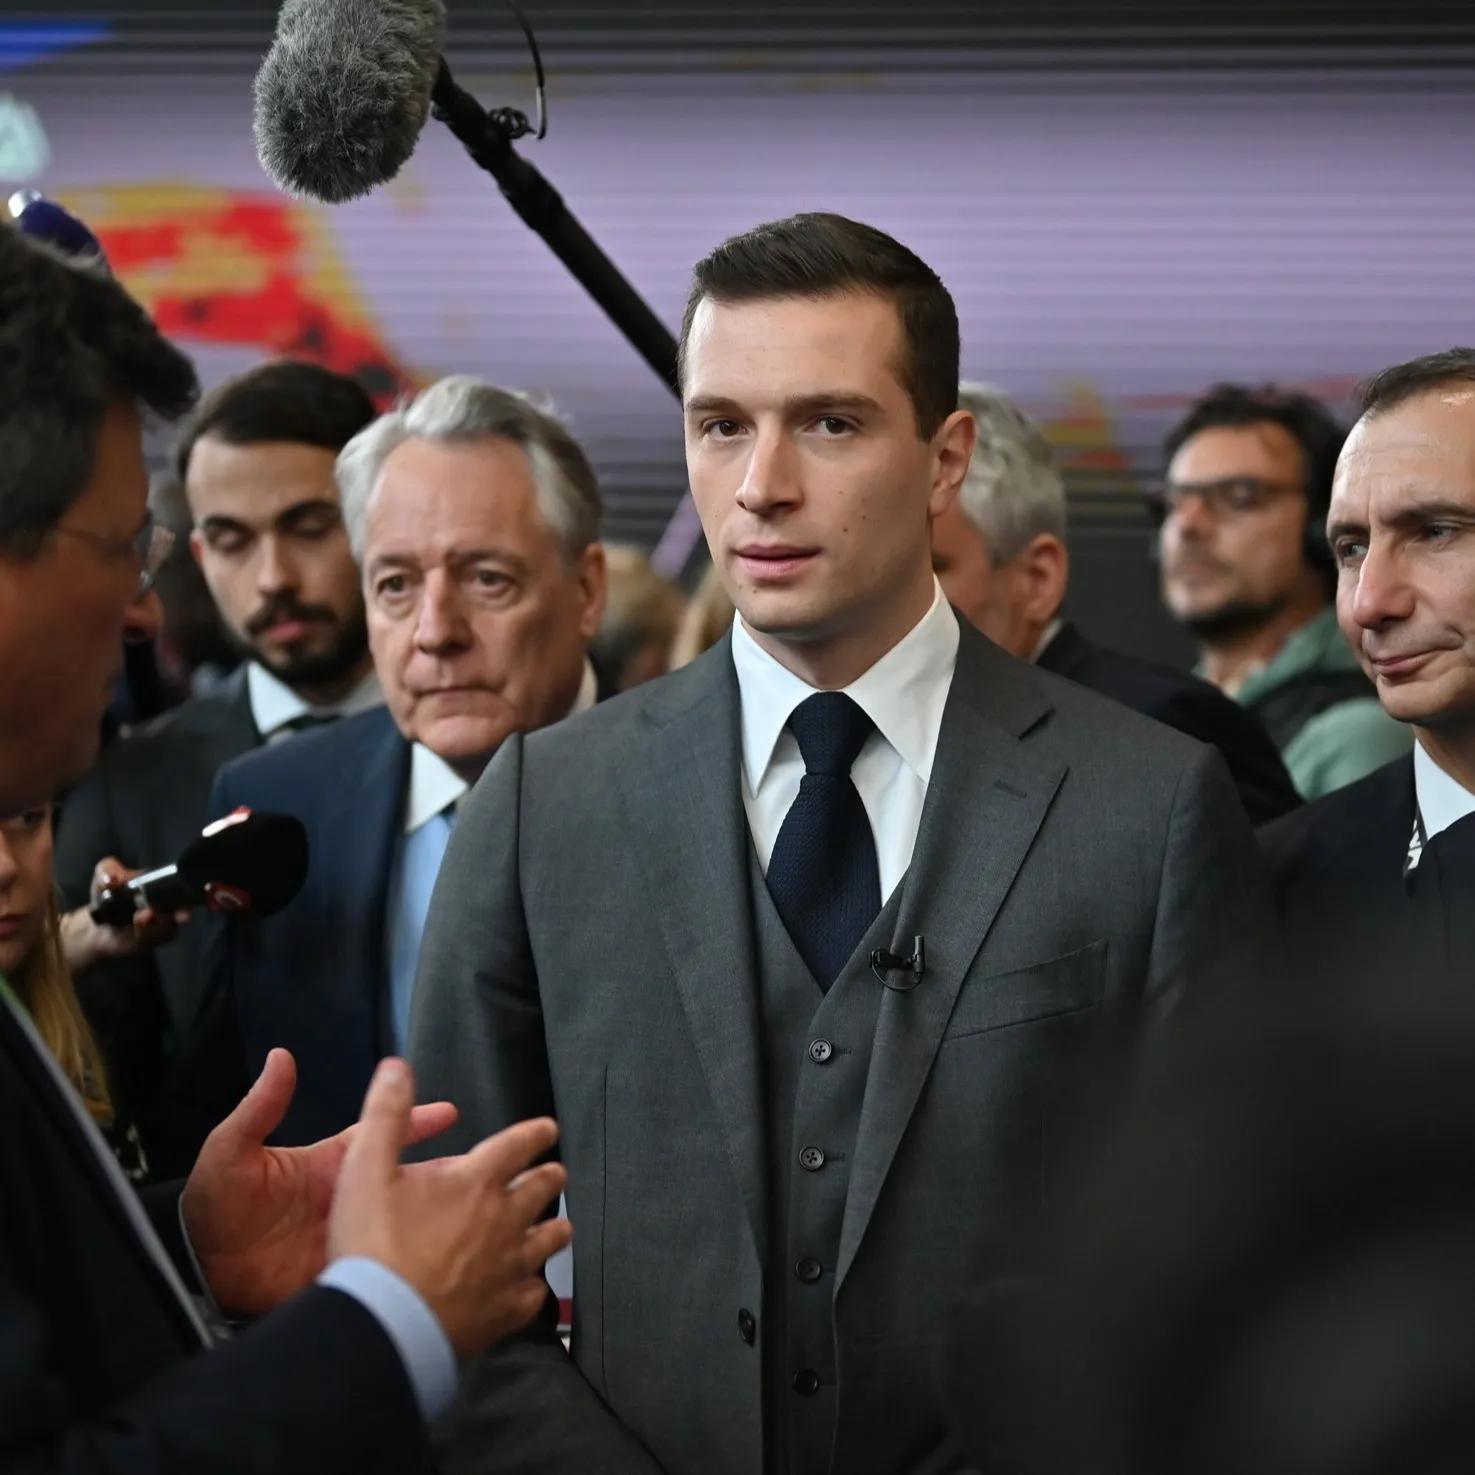 A man in a suit stands with a group of other men. There is a microphone above him